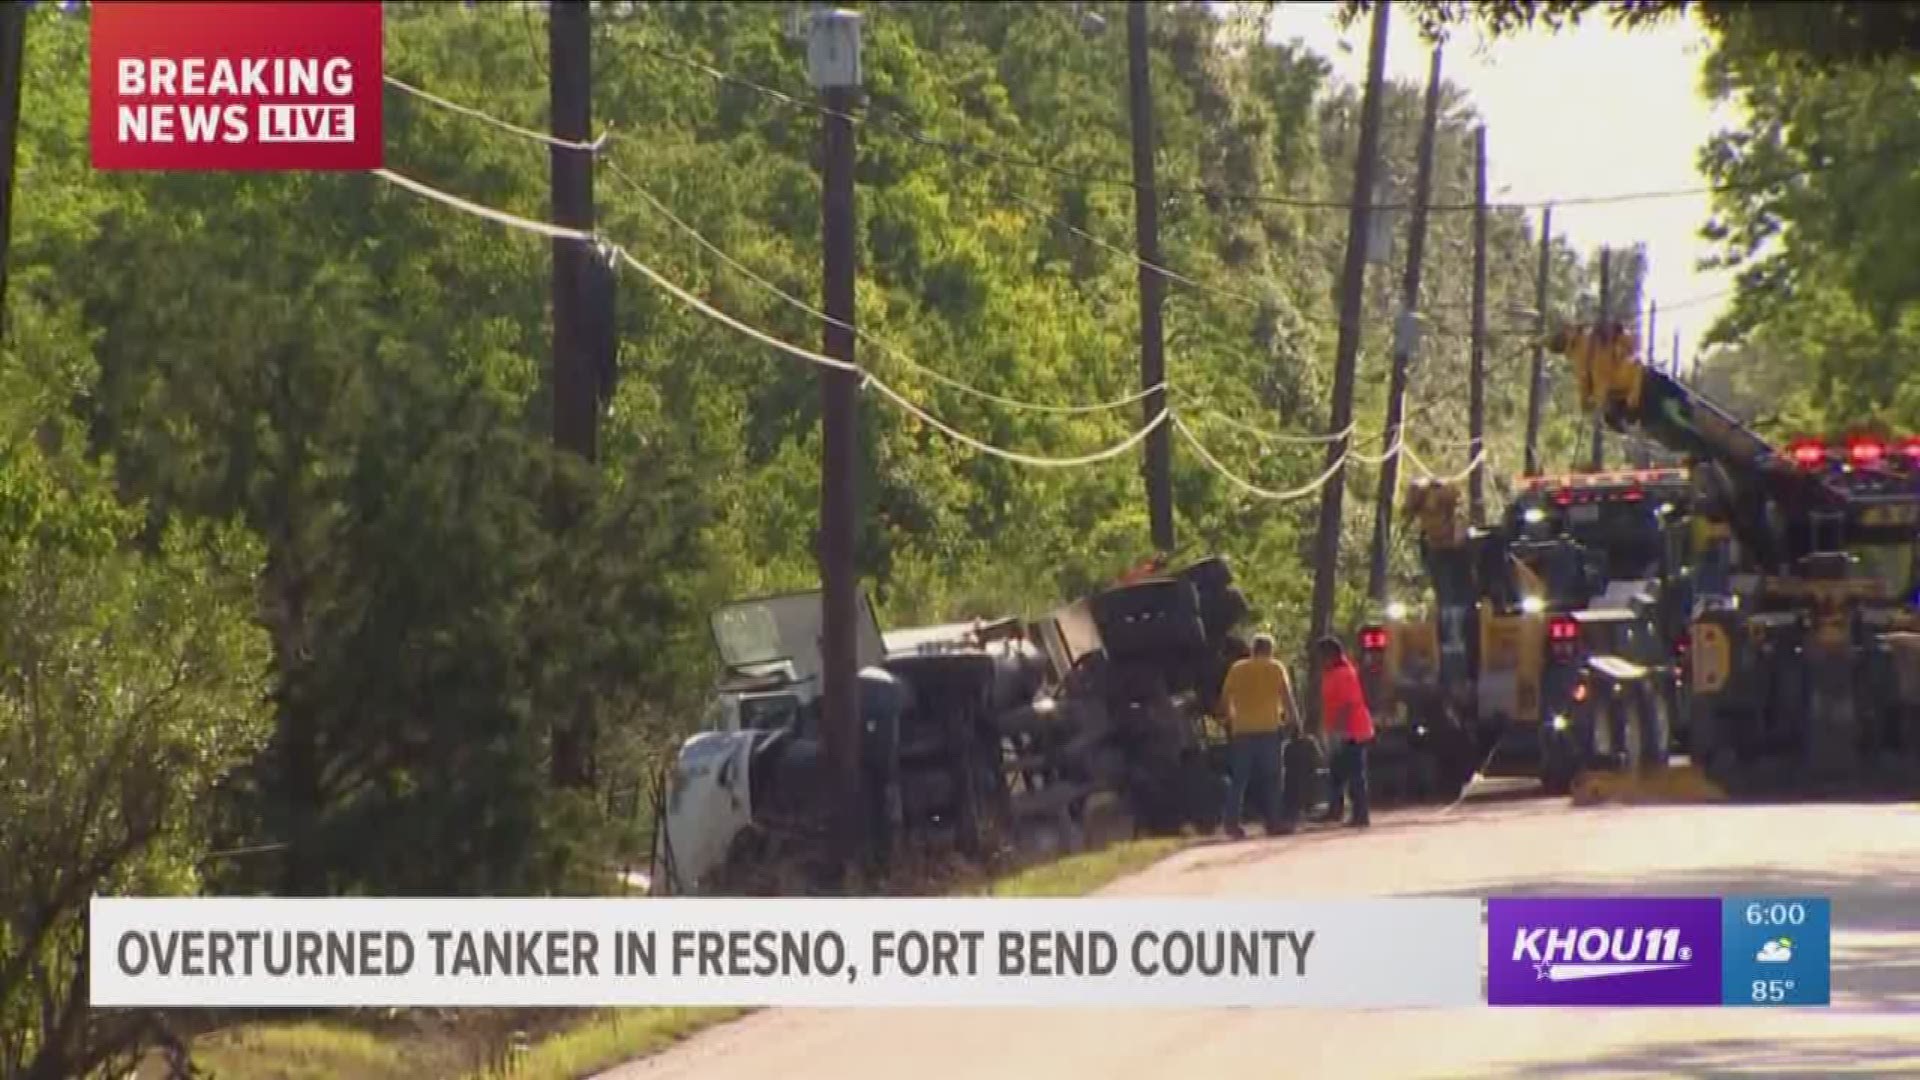 One person was injured Thursday after a tanker overturned in Fresno.